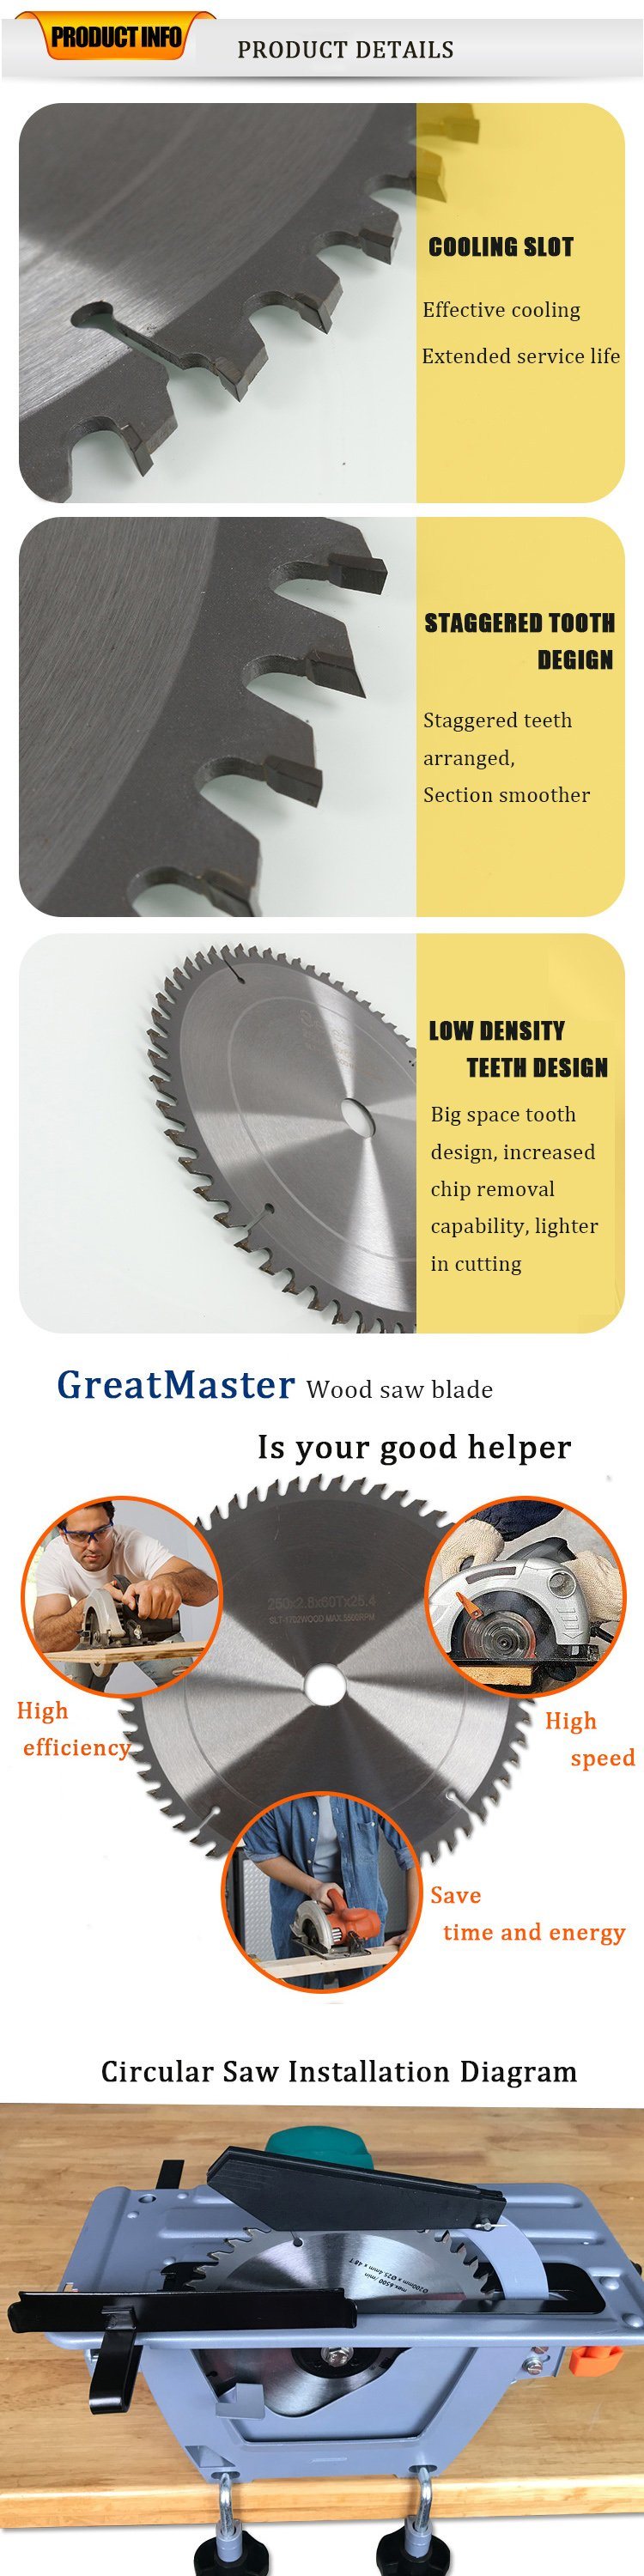 Tct Tip Tungsten Carbide Tipped Circular Saws Blade for Wood